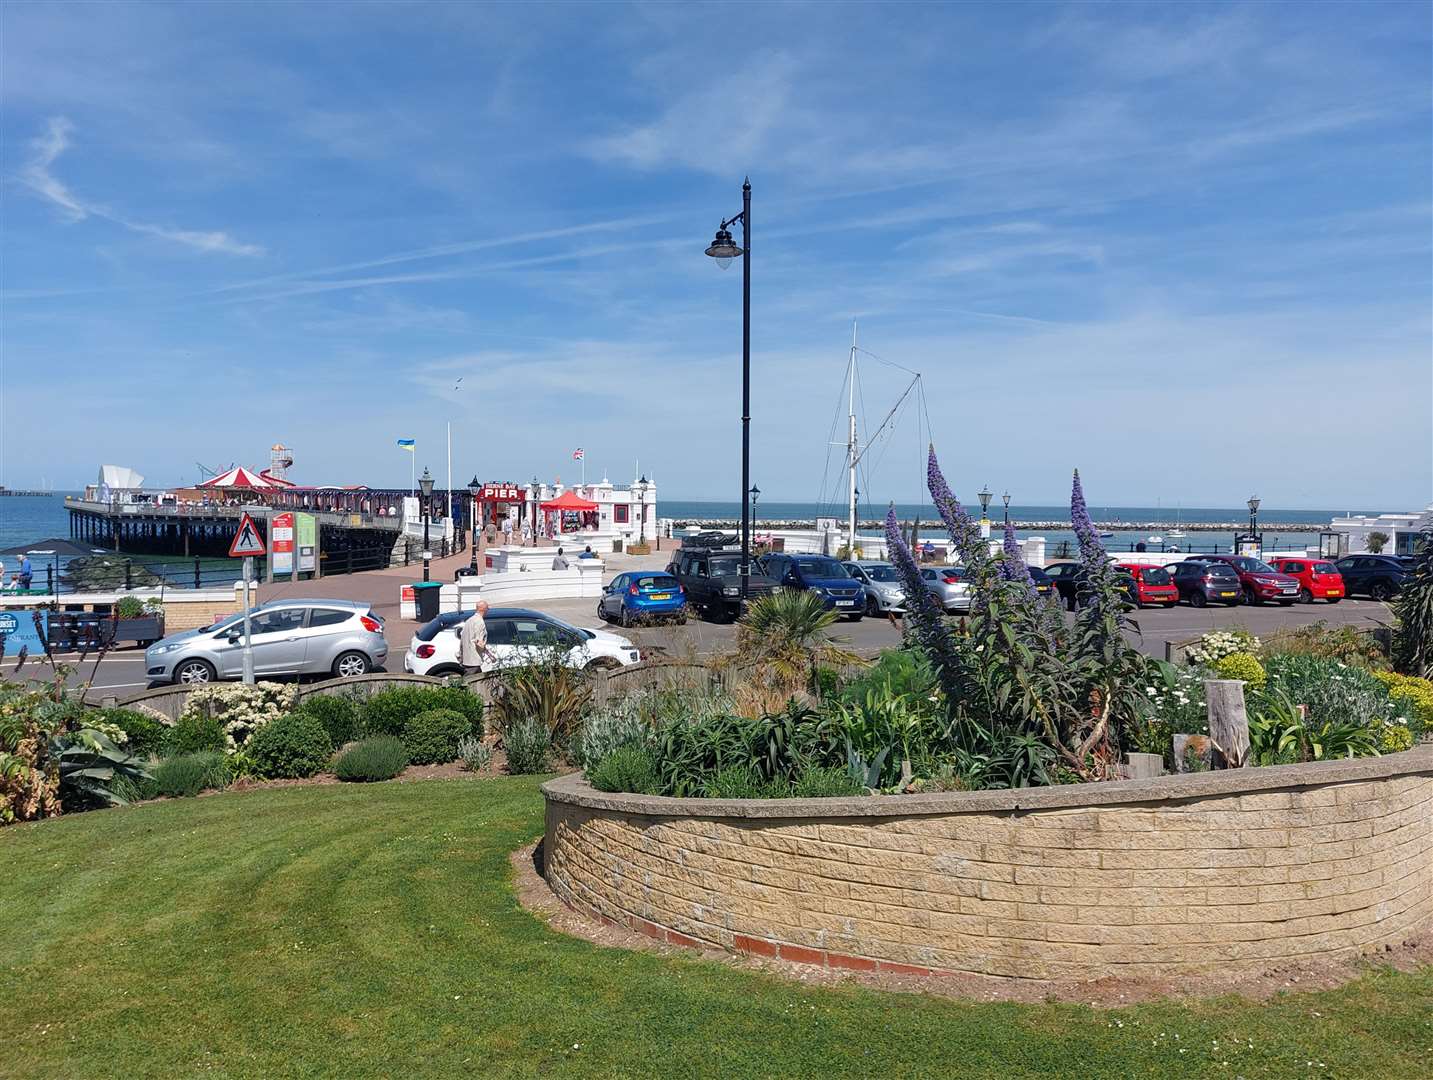 The seafront stretch between Station Road and Pier Avenue in Herne Bay would be pedestrianised